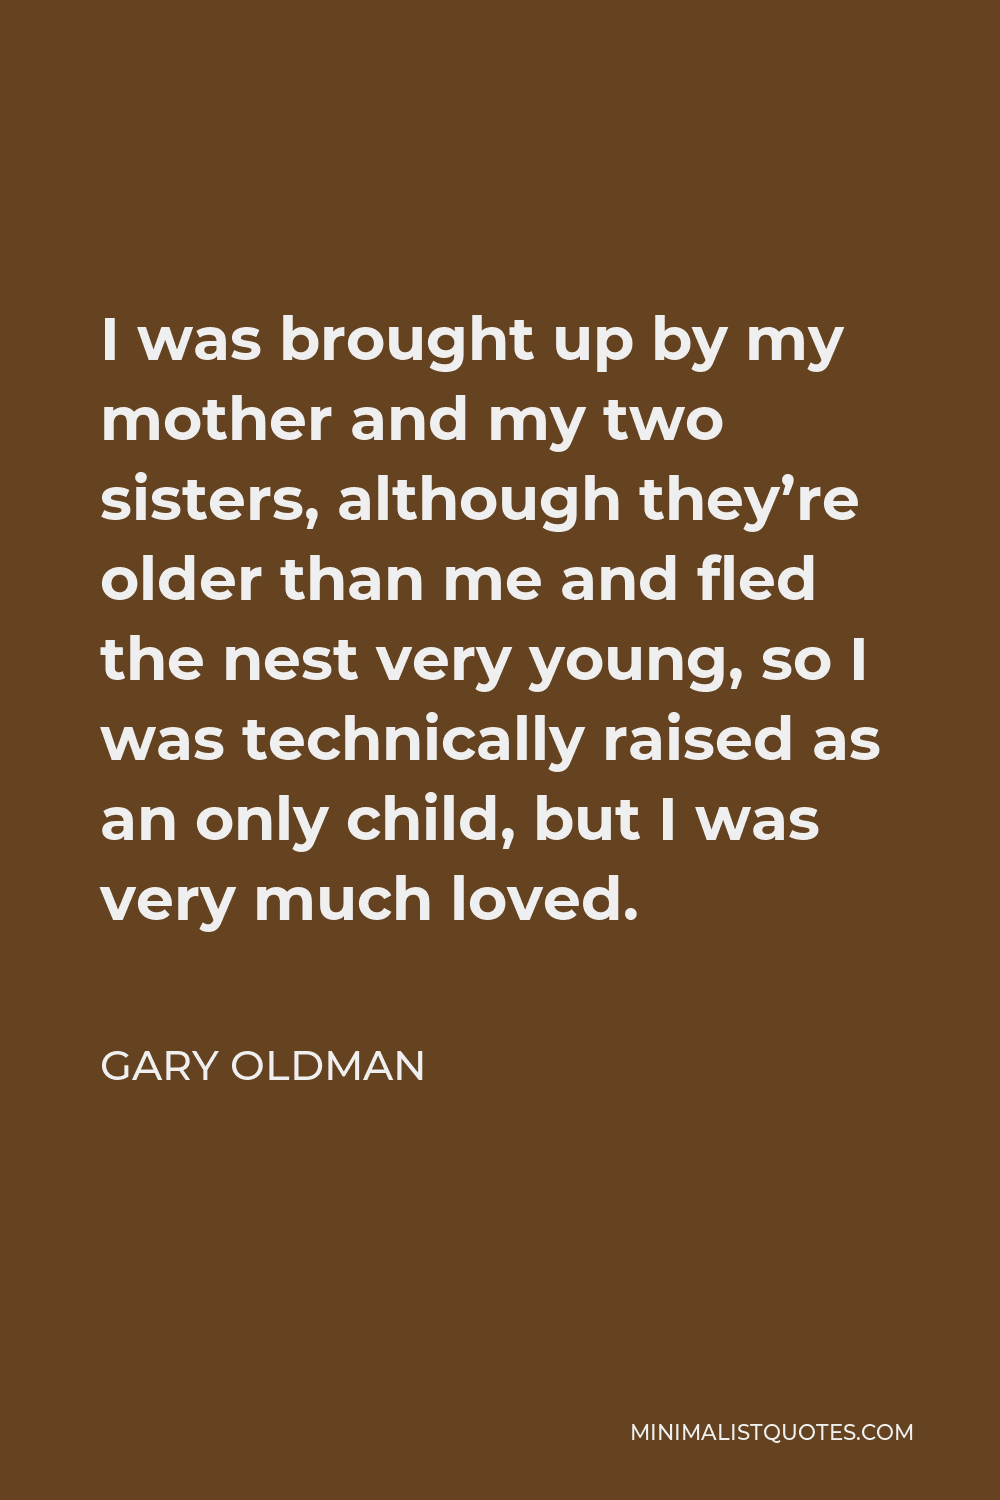 Gary Oldman Quote - I was brought up by my mother and my two sisters, although they’re older than me and fled the nest very young, so I was technically raised as an only child, but I was very much loved.